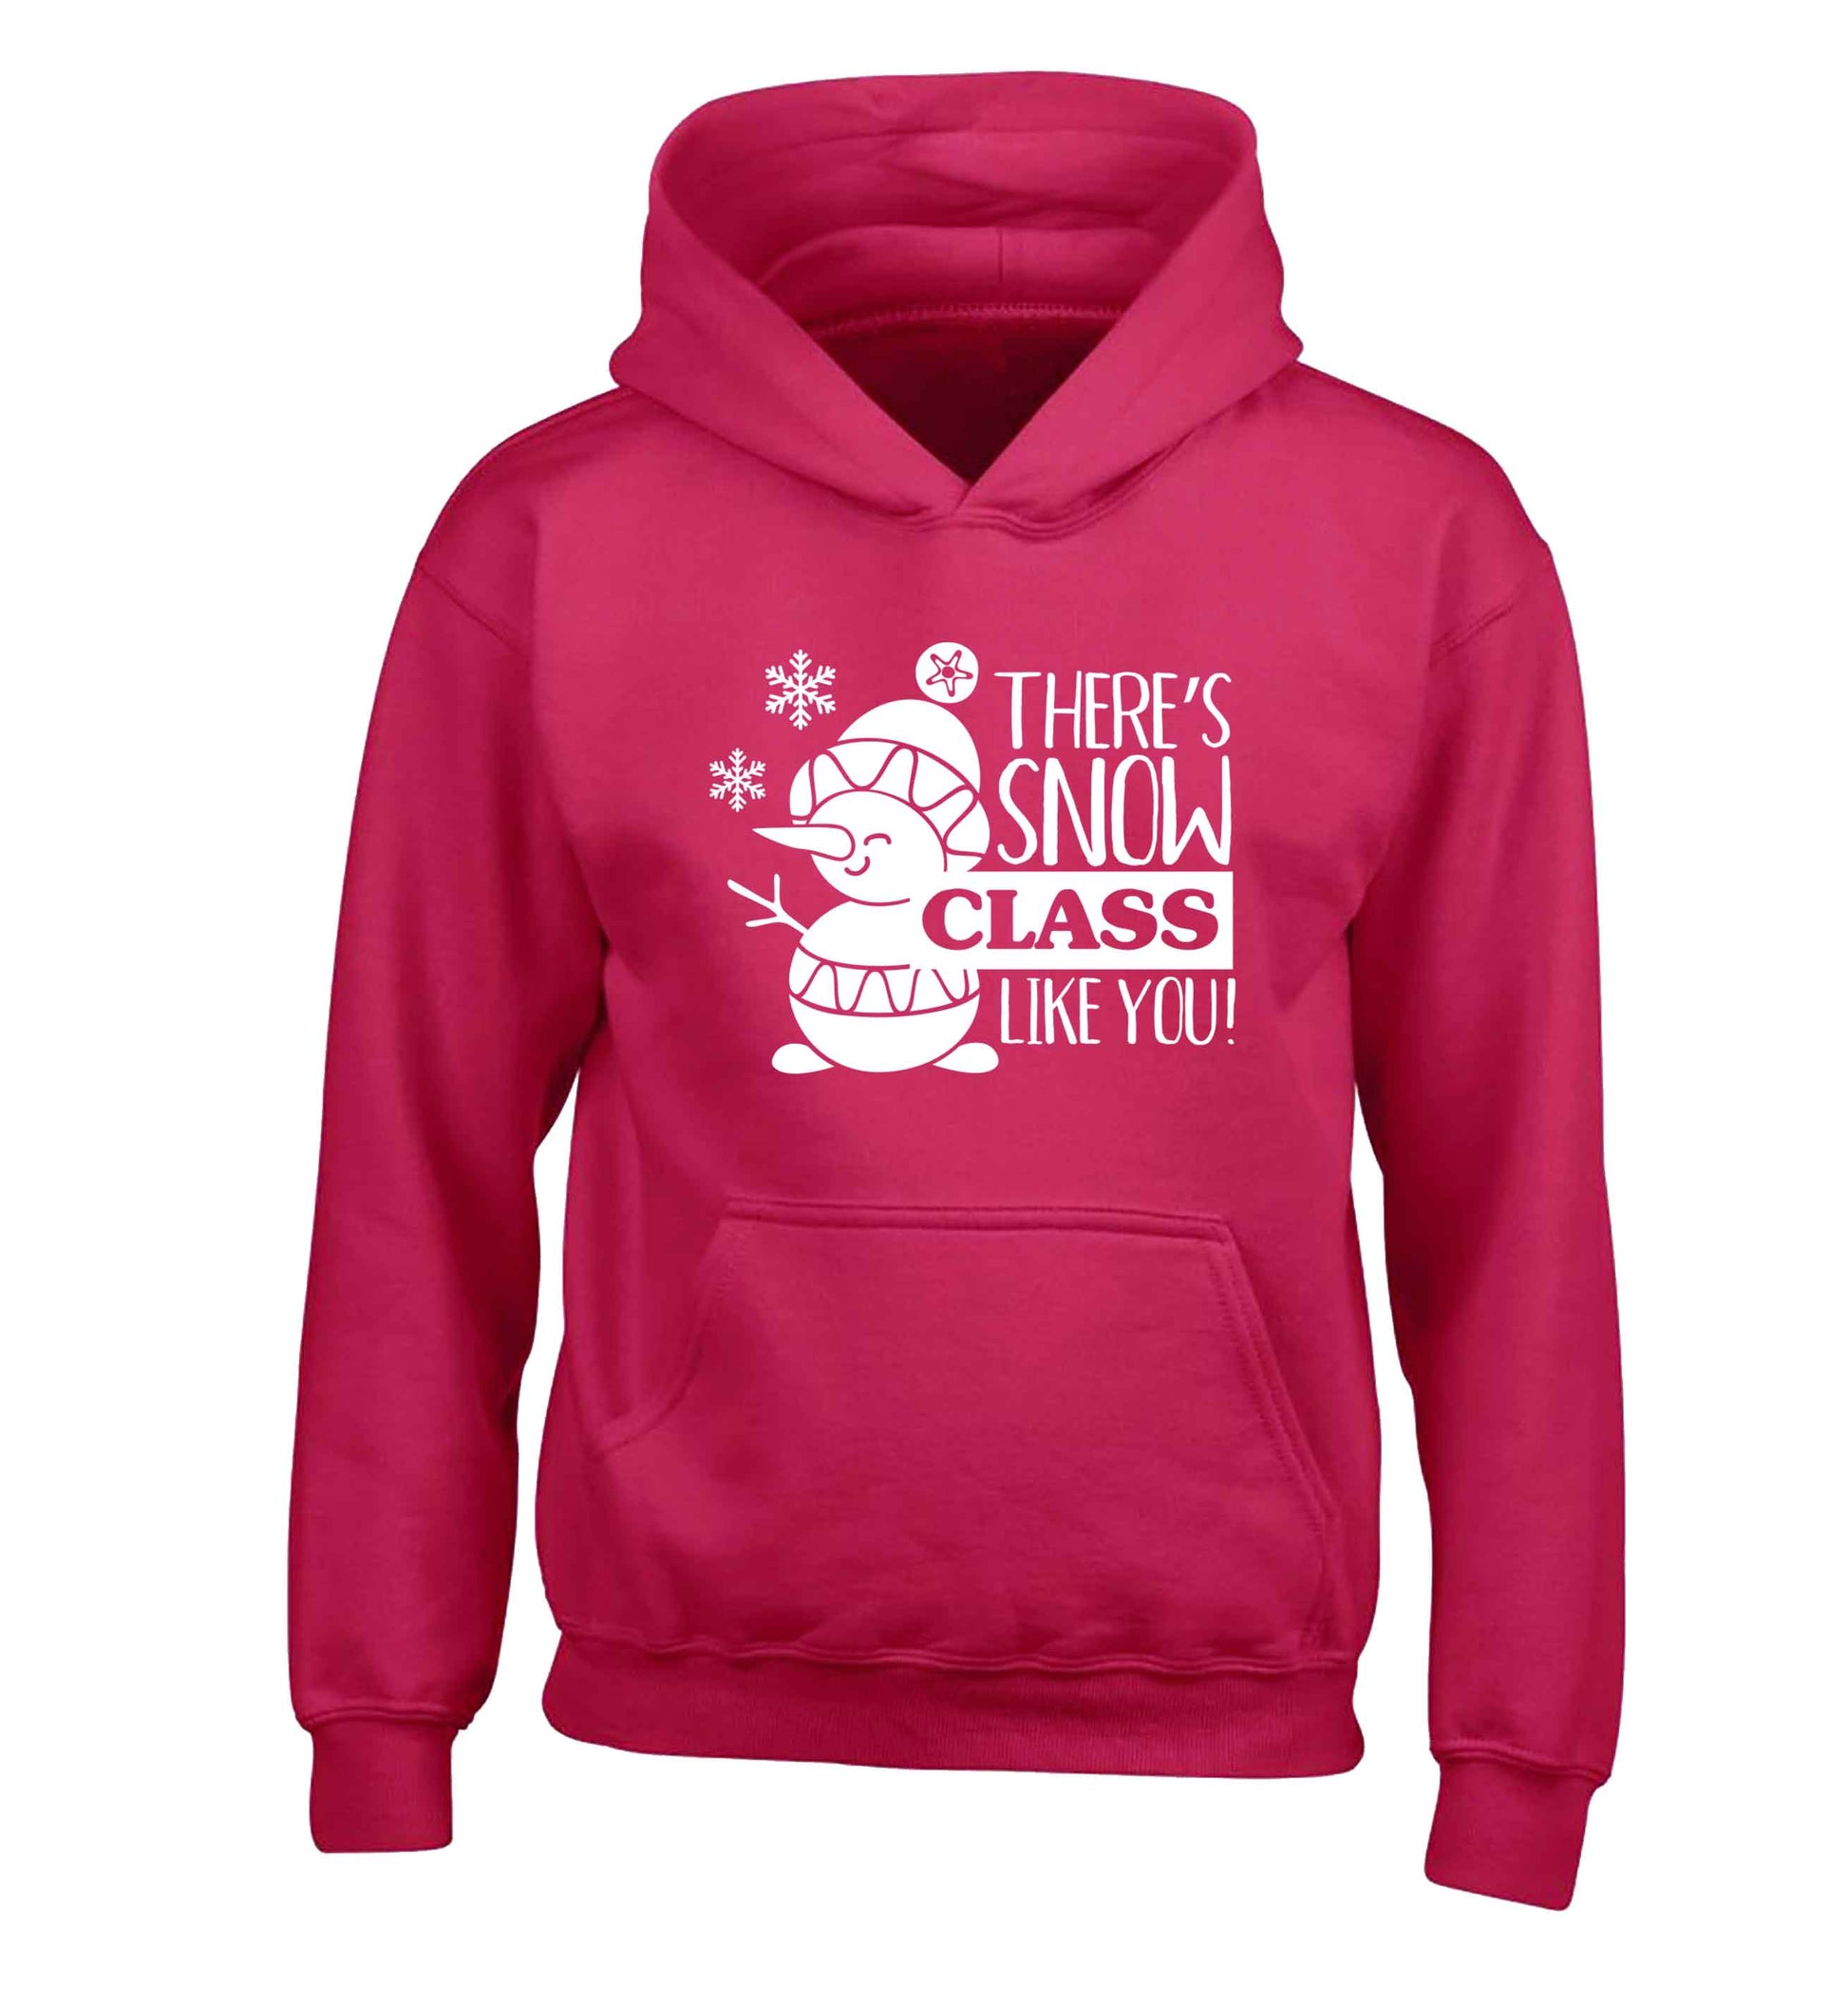 There's snow class like you children's pink hoodie 12-13 Years